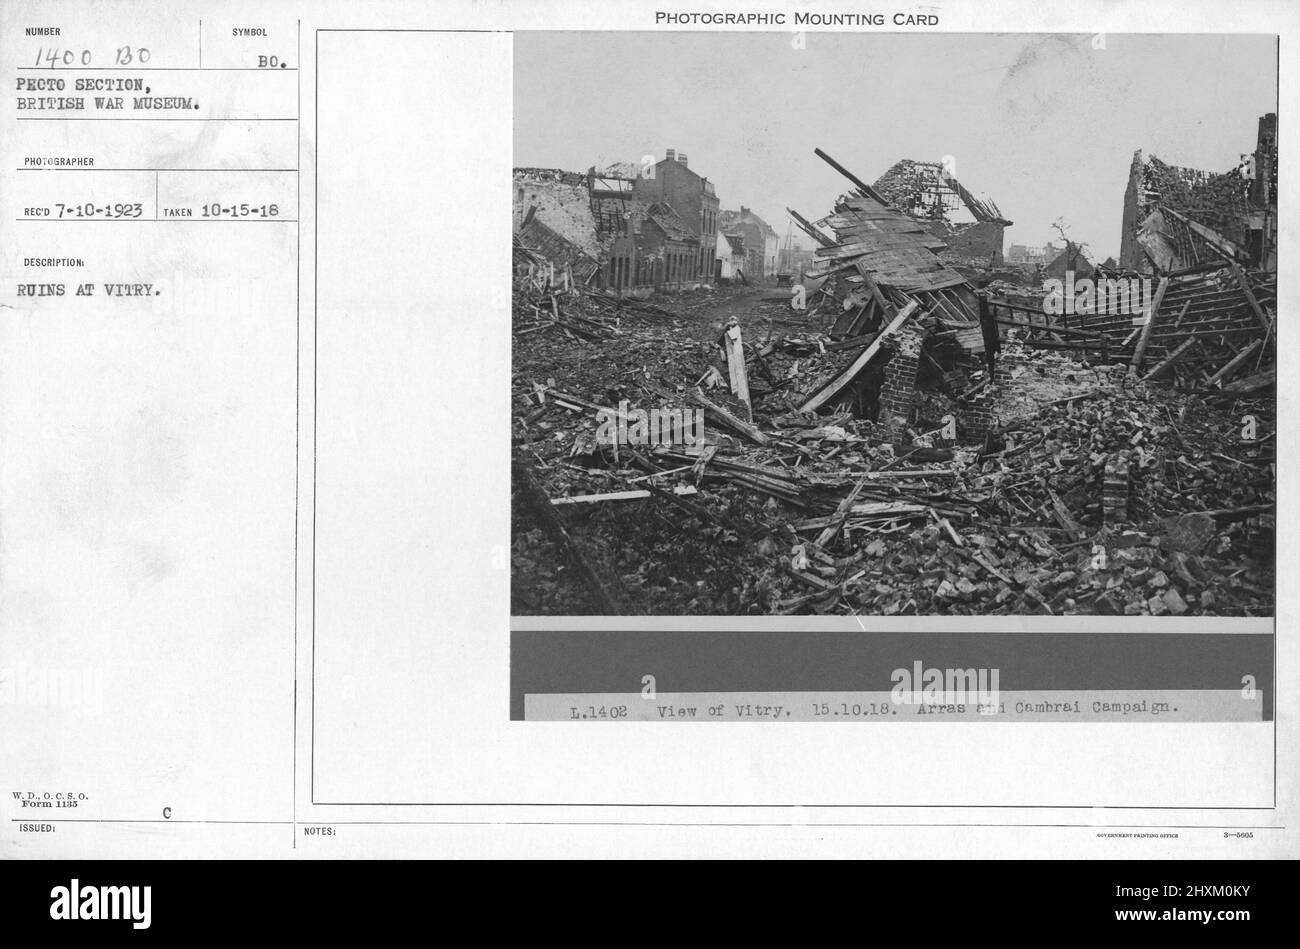 Ruins at Vitry. Collection of World War I Photographs, 1914-1918 that depict the military activities of British and other nation's armed forces and personnel during World War I. Stock Photo